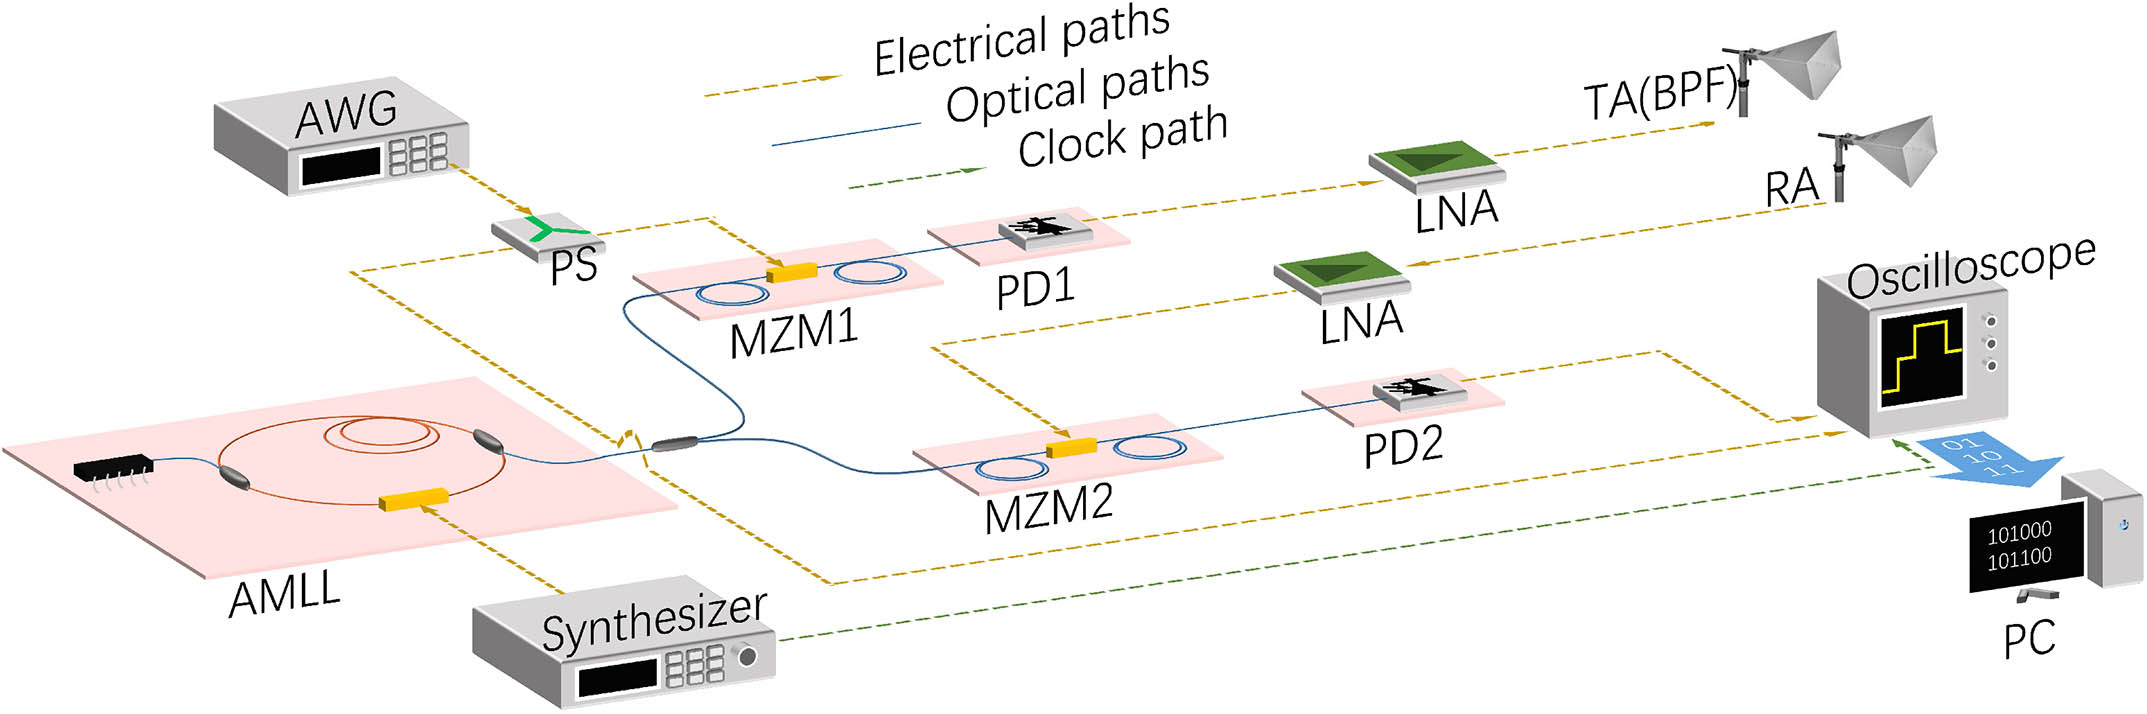 Experimental configuration of the photonics-based microwave radar. AMLL, actively mode-locked laser; AWG, arbitrary waveform generator; PS, power divider; MZM, Mach–Zehnder modulator; PD, photodetector; BPF, bandpass filter; LNA, low-noise amplifier; TA, transmitting antenna; RA, receiving antenna; PC, personal computer.